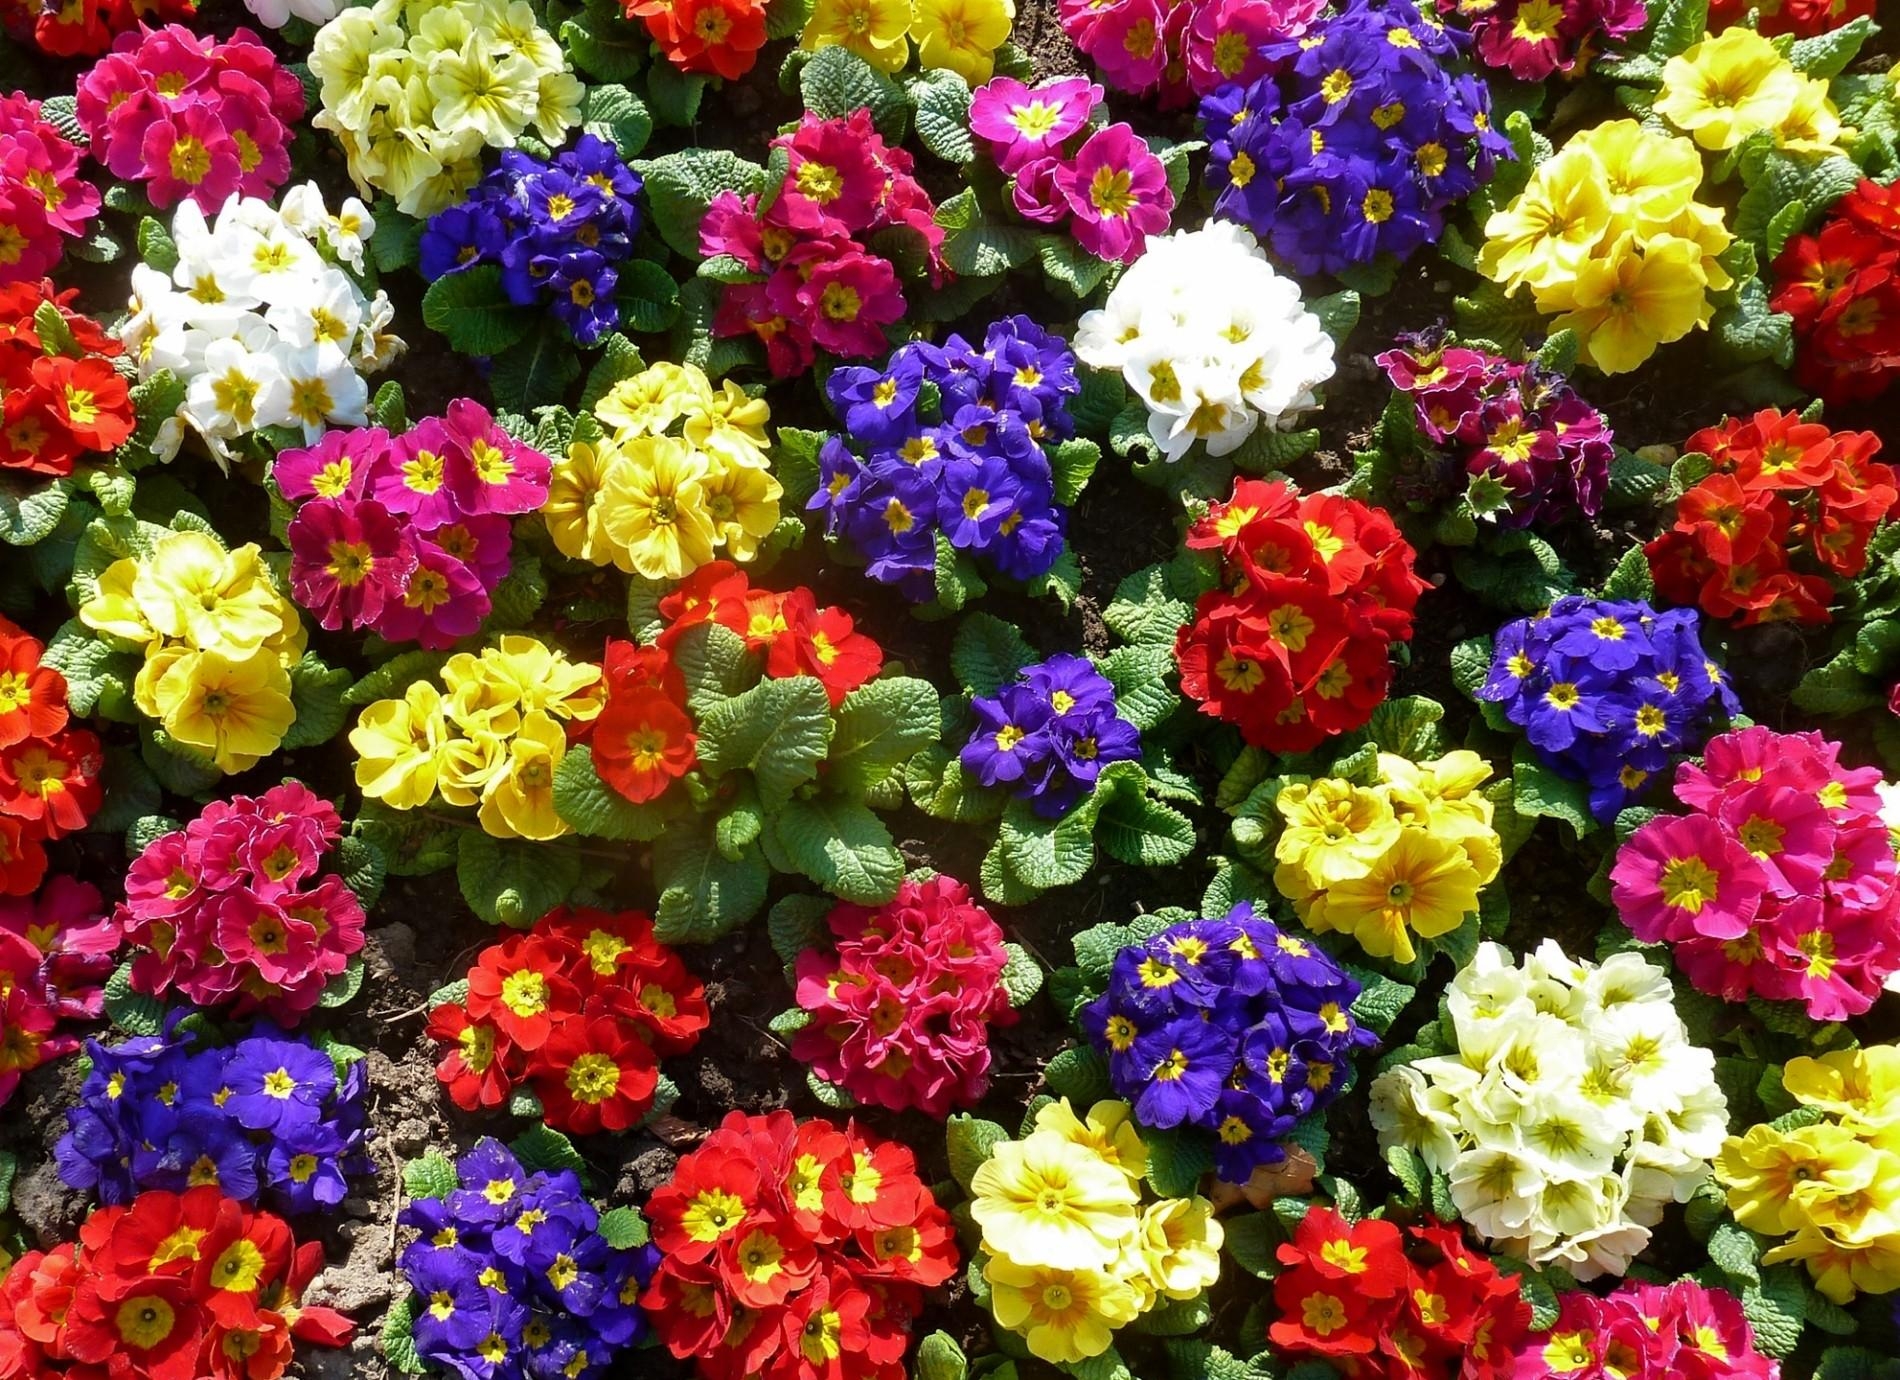 greens, flowers, bright, colorful, primrose, priming, ground High Definition image